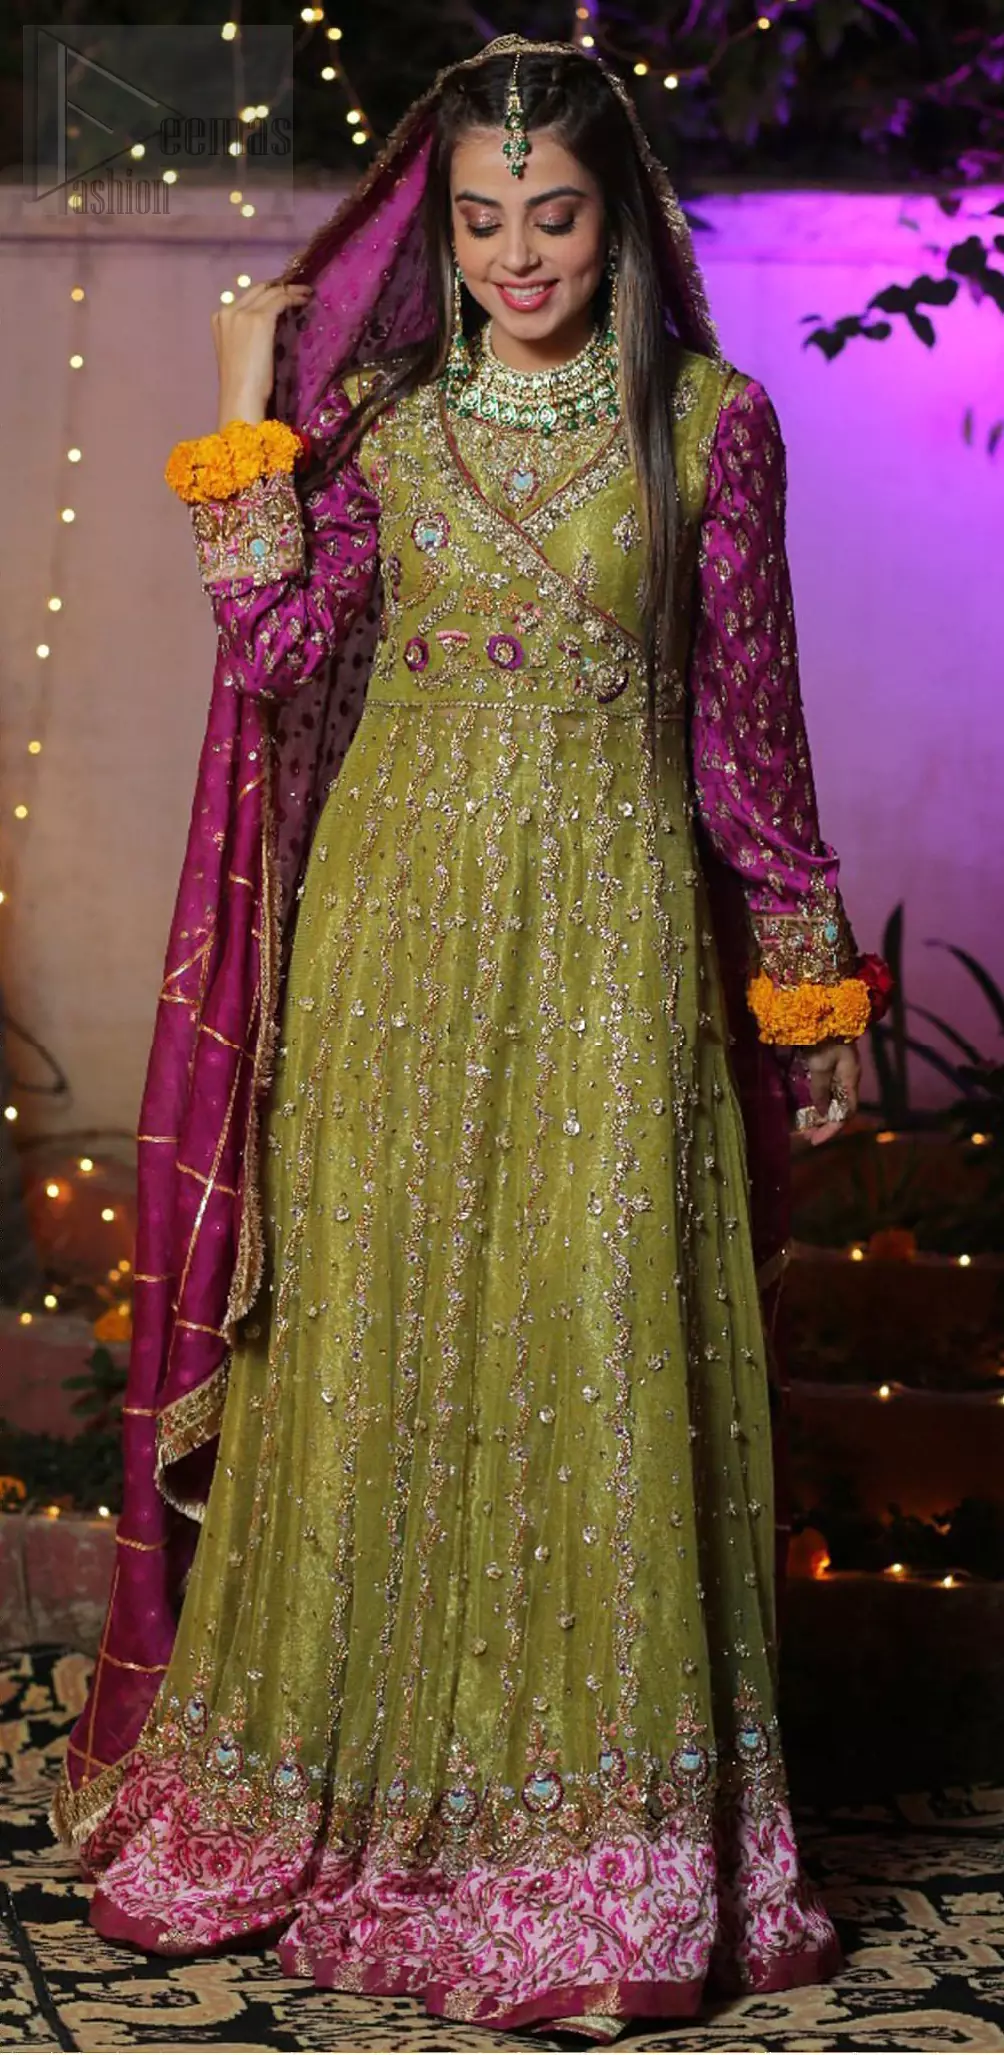 Nothing speaks of femininity and class louder than this mehndi outfits for bridesmaids. The sequinned whimsical florals embroidered across the flattering bodice in this ethereal frock is sure to turn heads in every room you walk into. The pairing of champagne zardozi work with parrot green fabric is an artist’s dream colour palette. The frock hemline is emphasized with banarsi applique details that gives perfect ending to this outfit. It comprises with matching tissue lehenga. The magenta organza dupatta with chann and gota work, finishing with kiran lace all around the edges makes the look complete. 